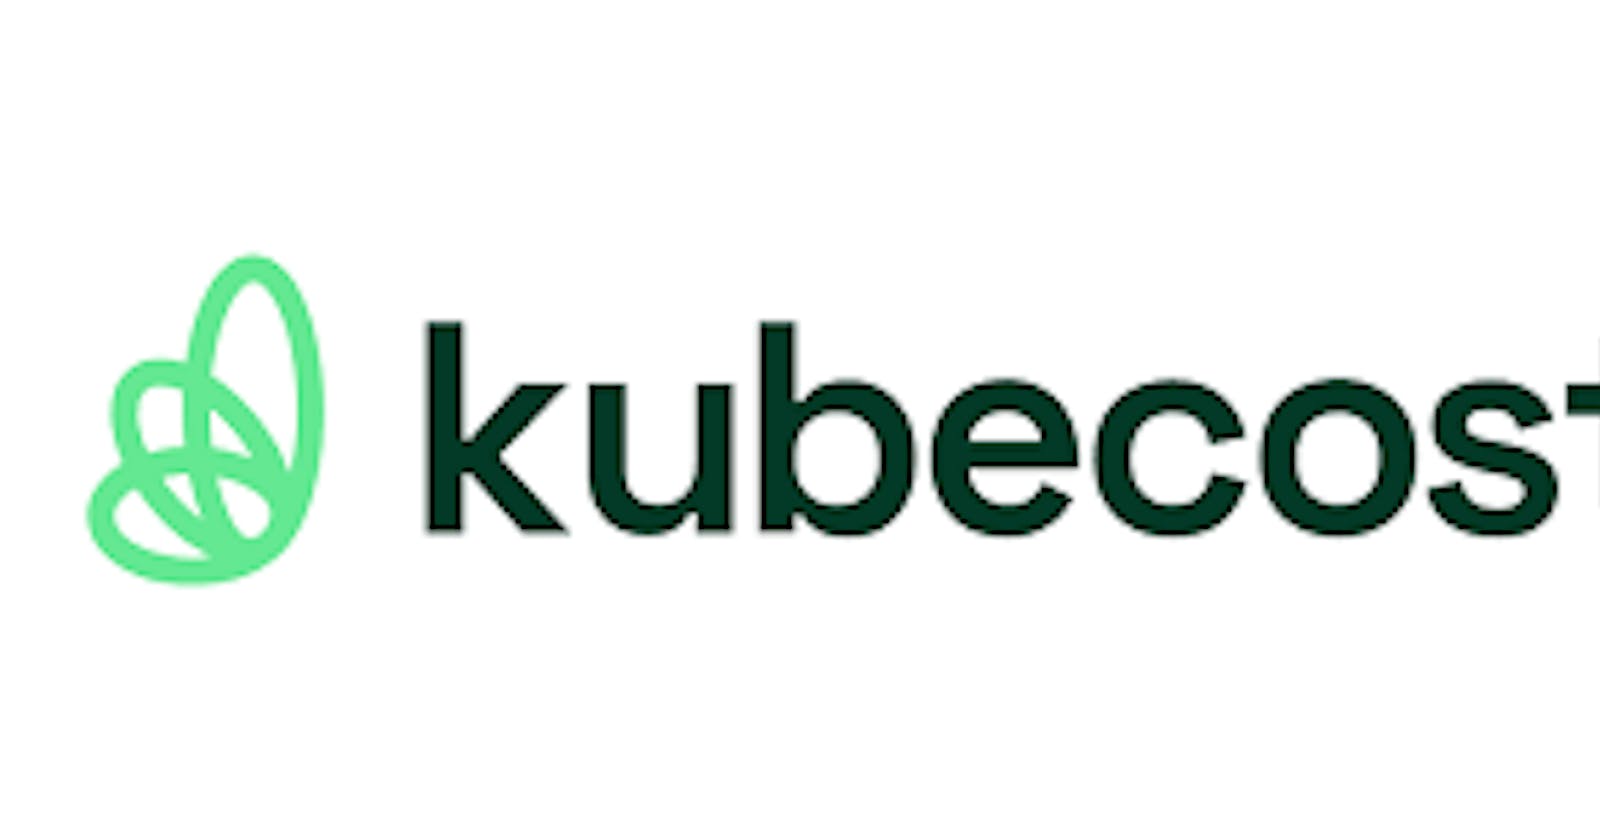 How To Install Kubecost: The Complete Guide